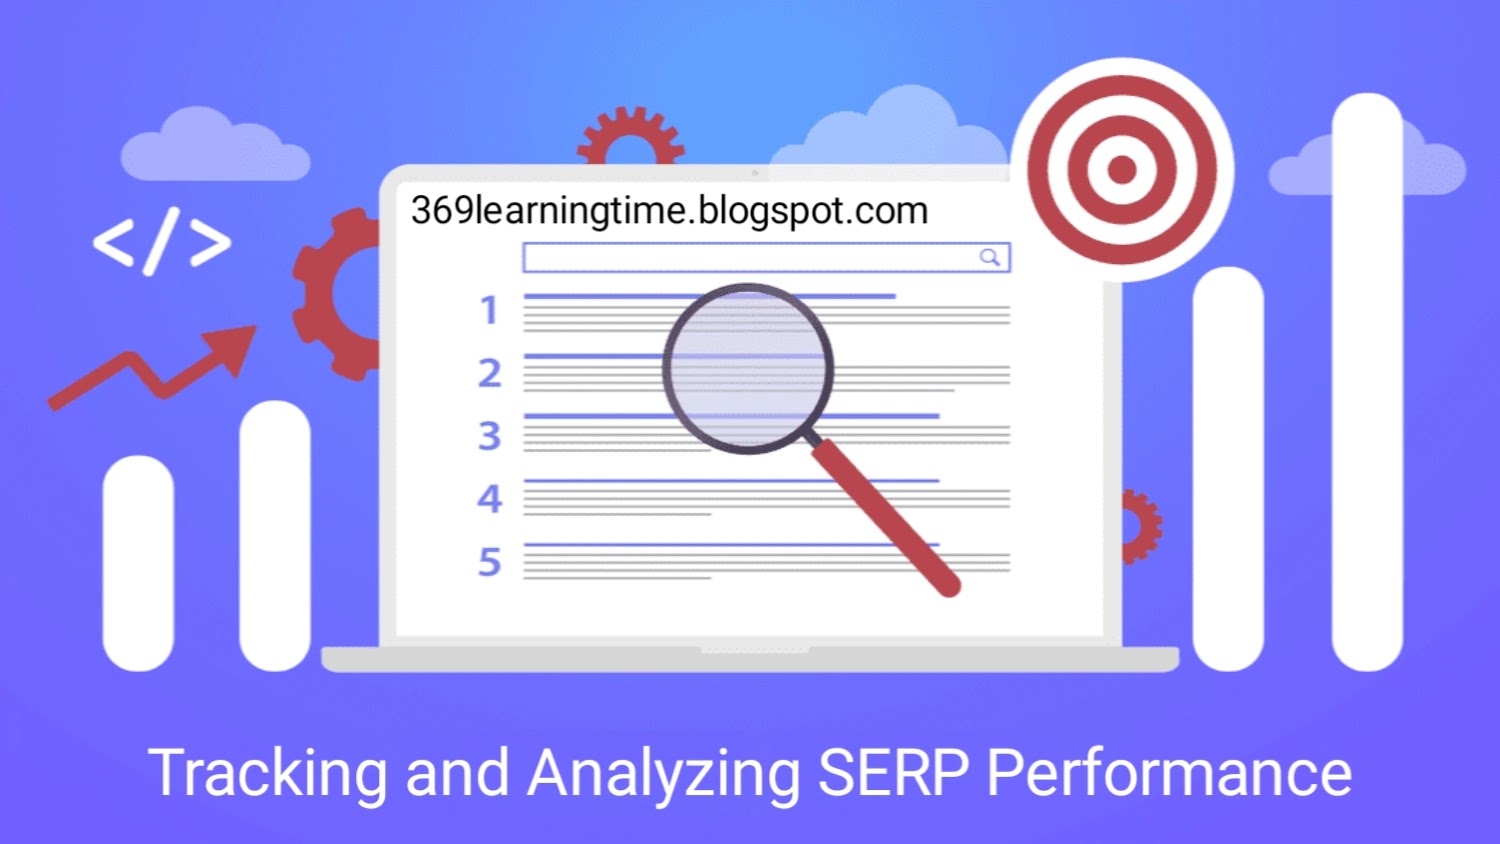 What is SERP in SEO?